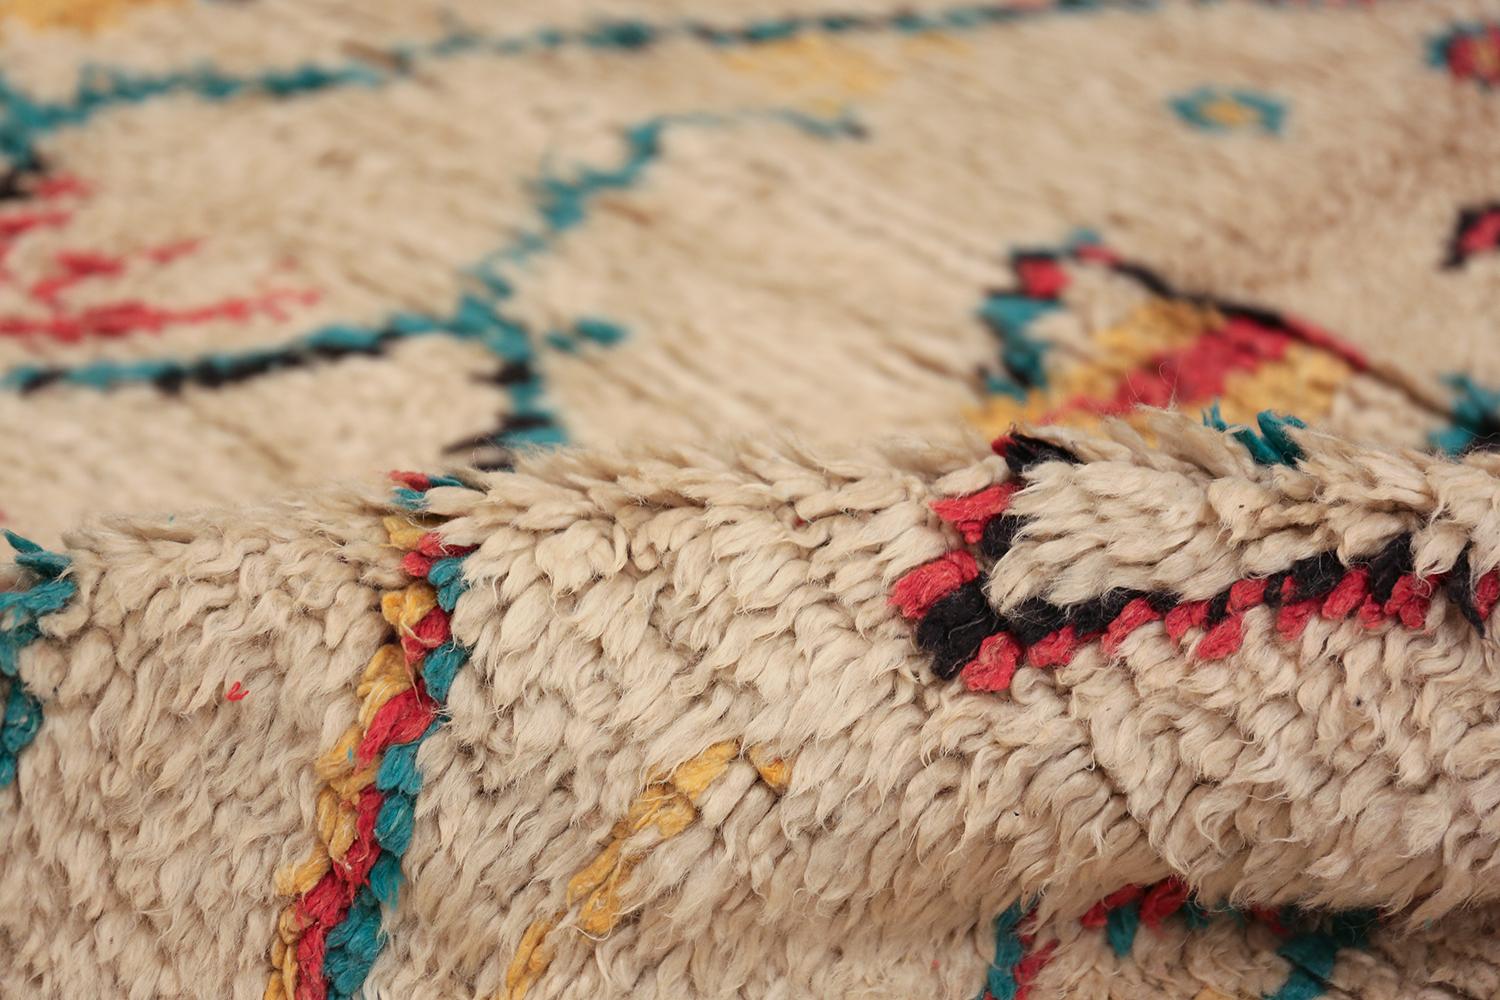 Breathtakingly colorful small size vintage Moroccan rug, country of origin / rug type: Morocco, date: circa mid-20th century. Size: 4 ft 2 in x 7 ft (1.27 m x 2.13 m)

This fanciful and cheerful vintage Moroccan rug would be a delightful addition to